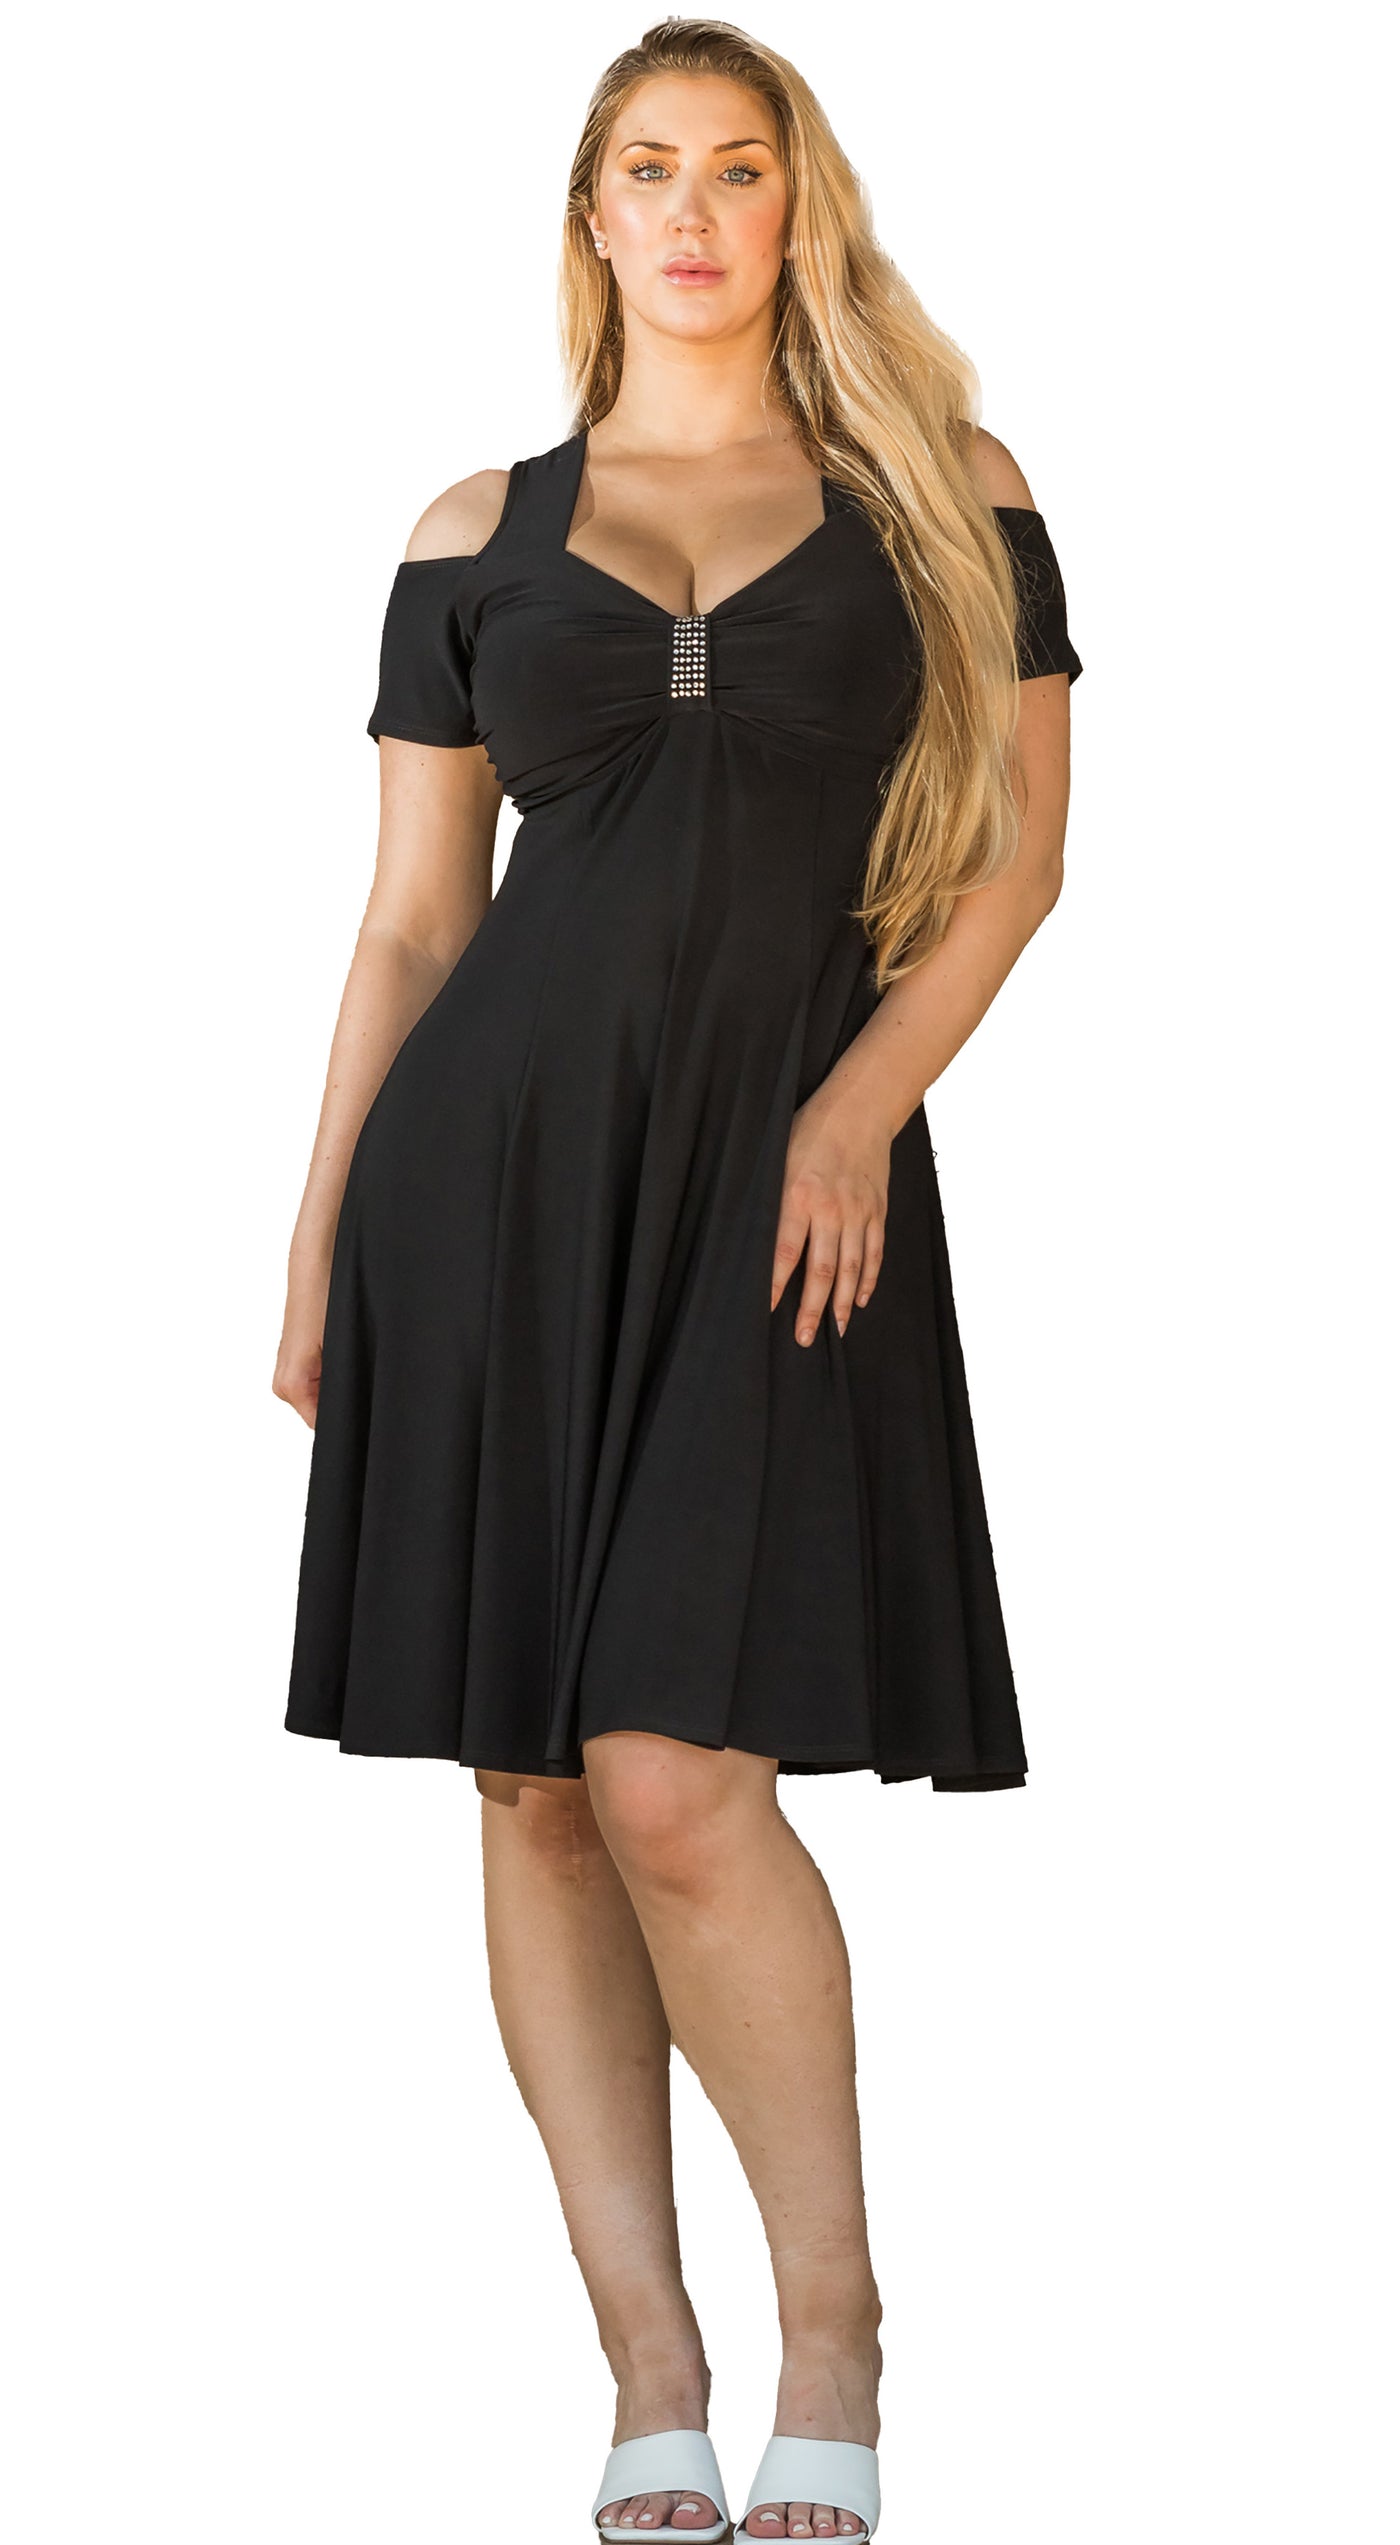 Funfash Plus Size Women Open Cold Shoulders Black Cocktail Dress Made in USA (S)